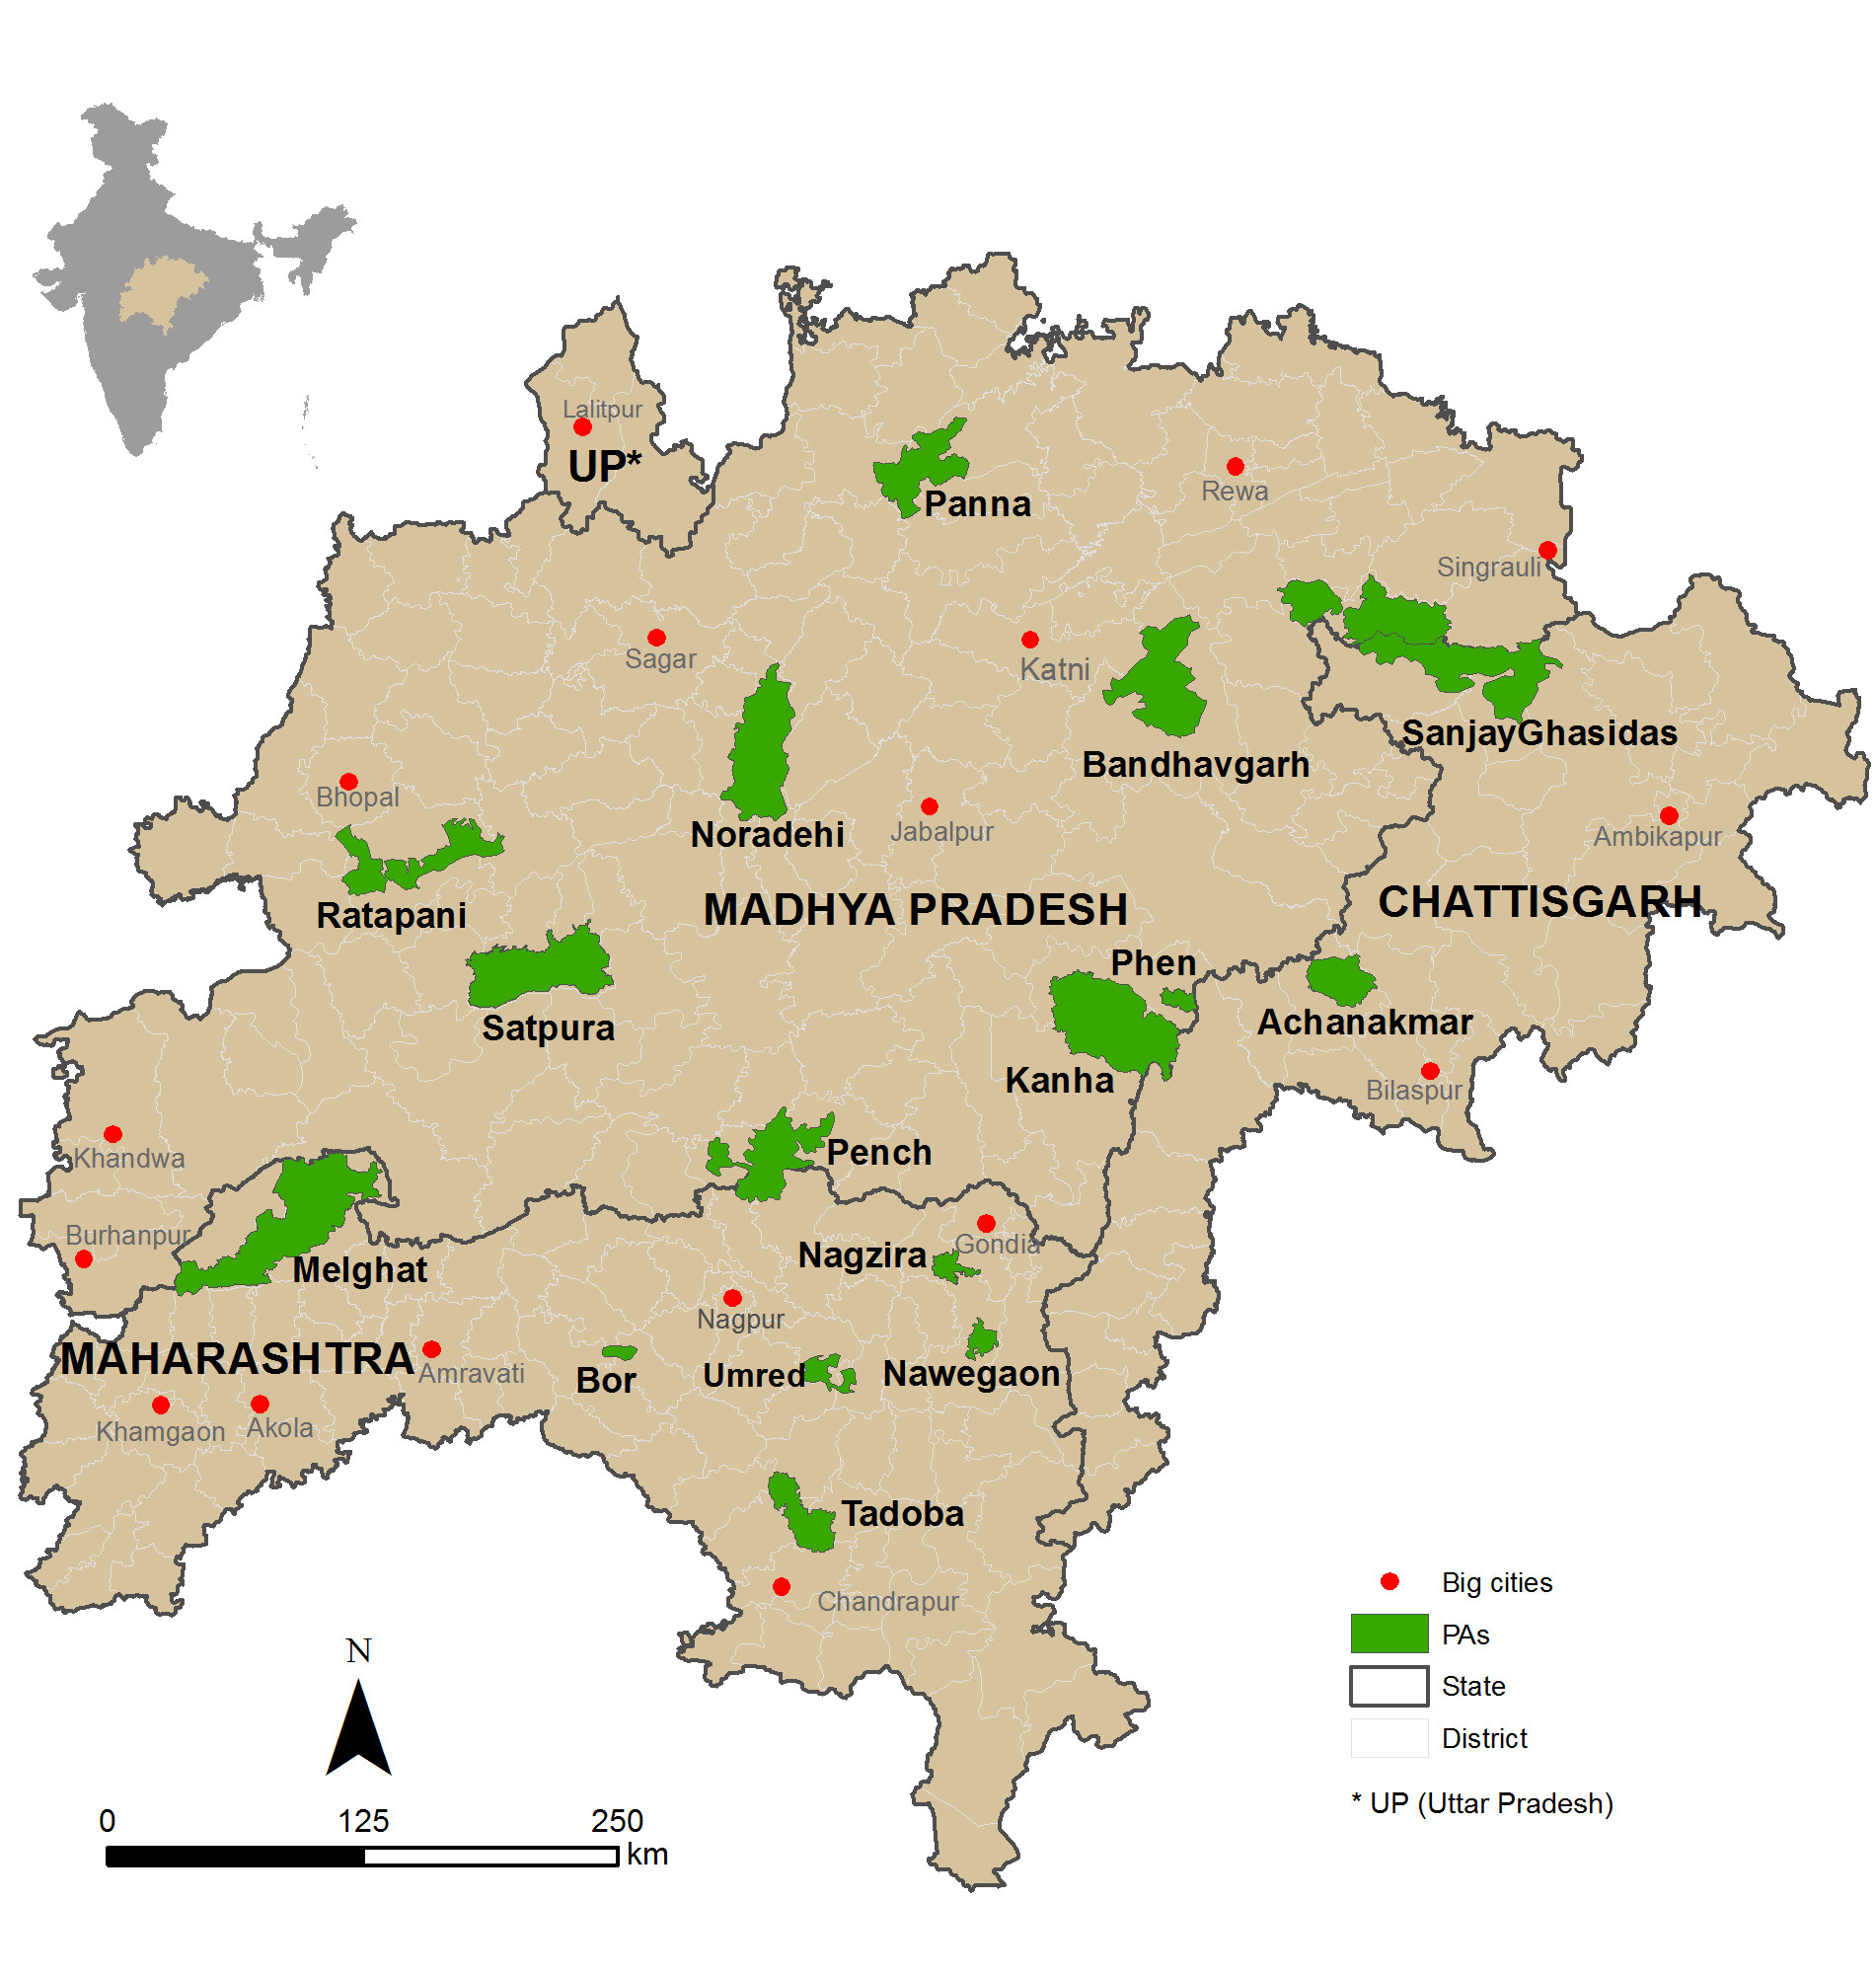 Map of study landscape. The location in India is shown in the inset. State and district boundaries are shown black and gray, respectively. Protected areas are shown in green, and big cities/towns (with population greater than 88,000 people) are represented as red dots.